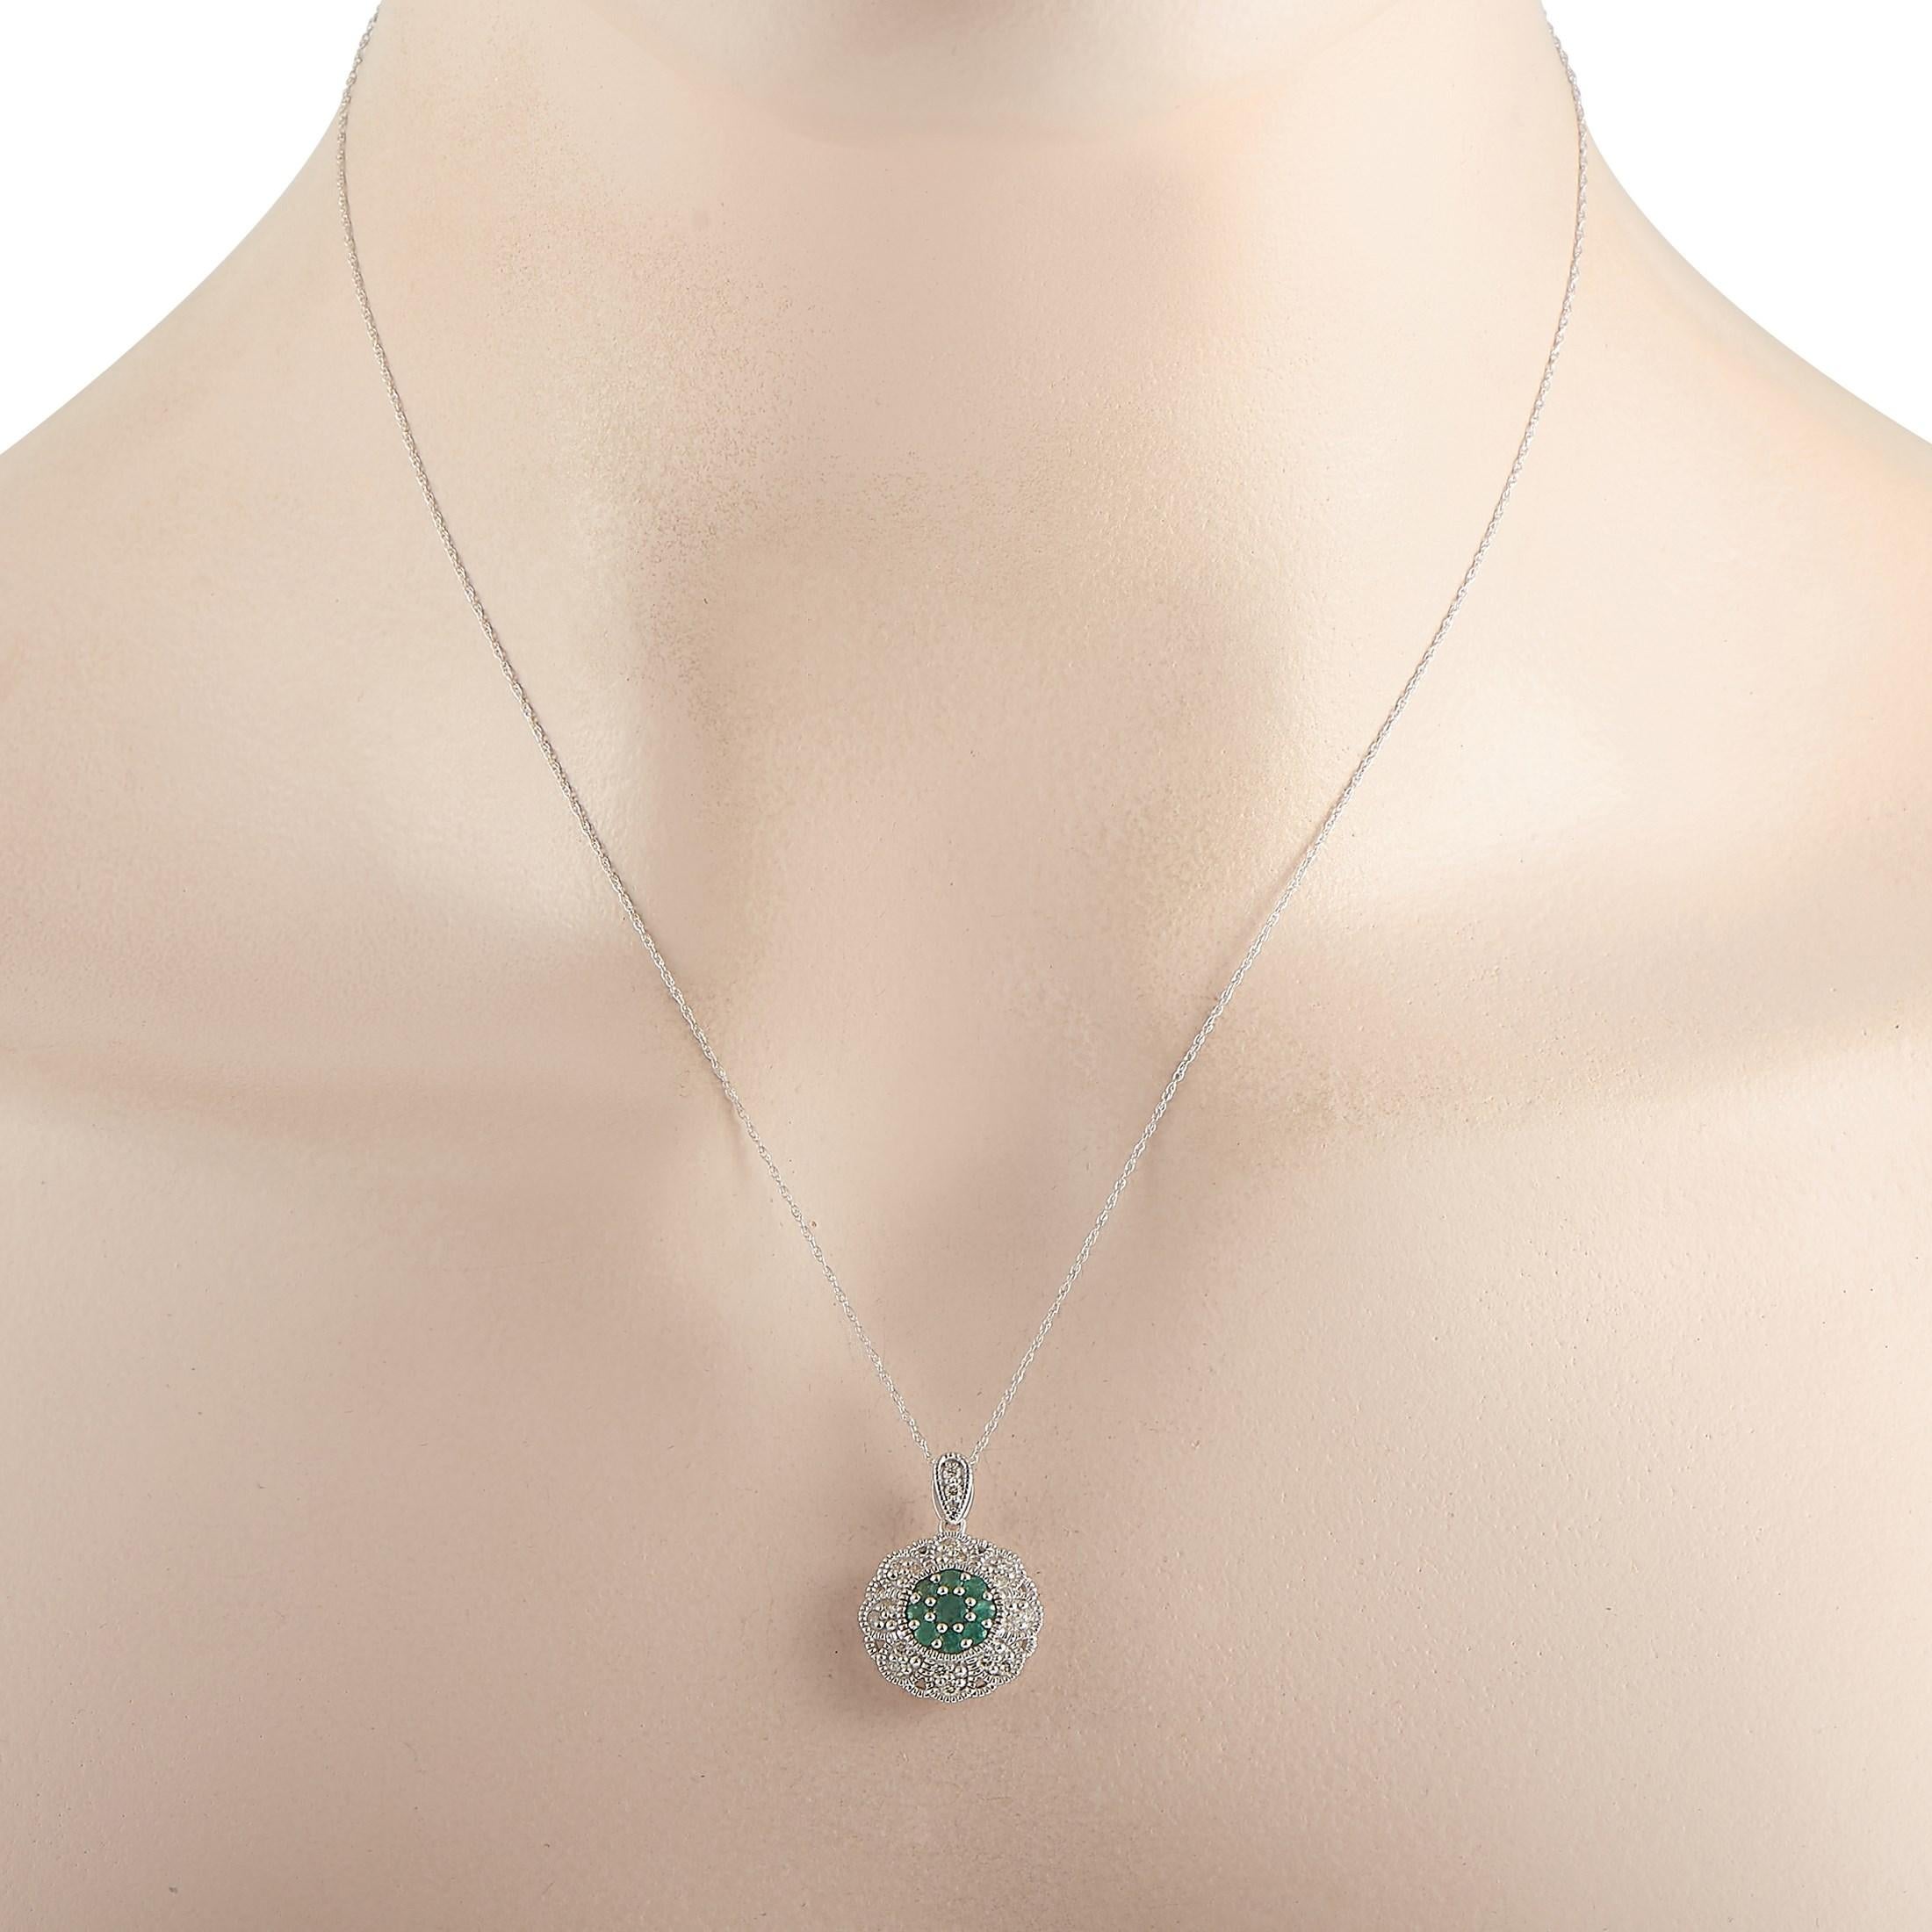 This lovely LB Exclusive 14K White Gold 0.27 ct Diamond and Emerald Necklace includes a delicate 14K White Gold chain that measures 18 inches in length and features a spring ring closure. The necklace includes a matching 14K white gold round pendant